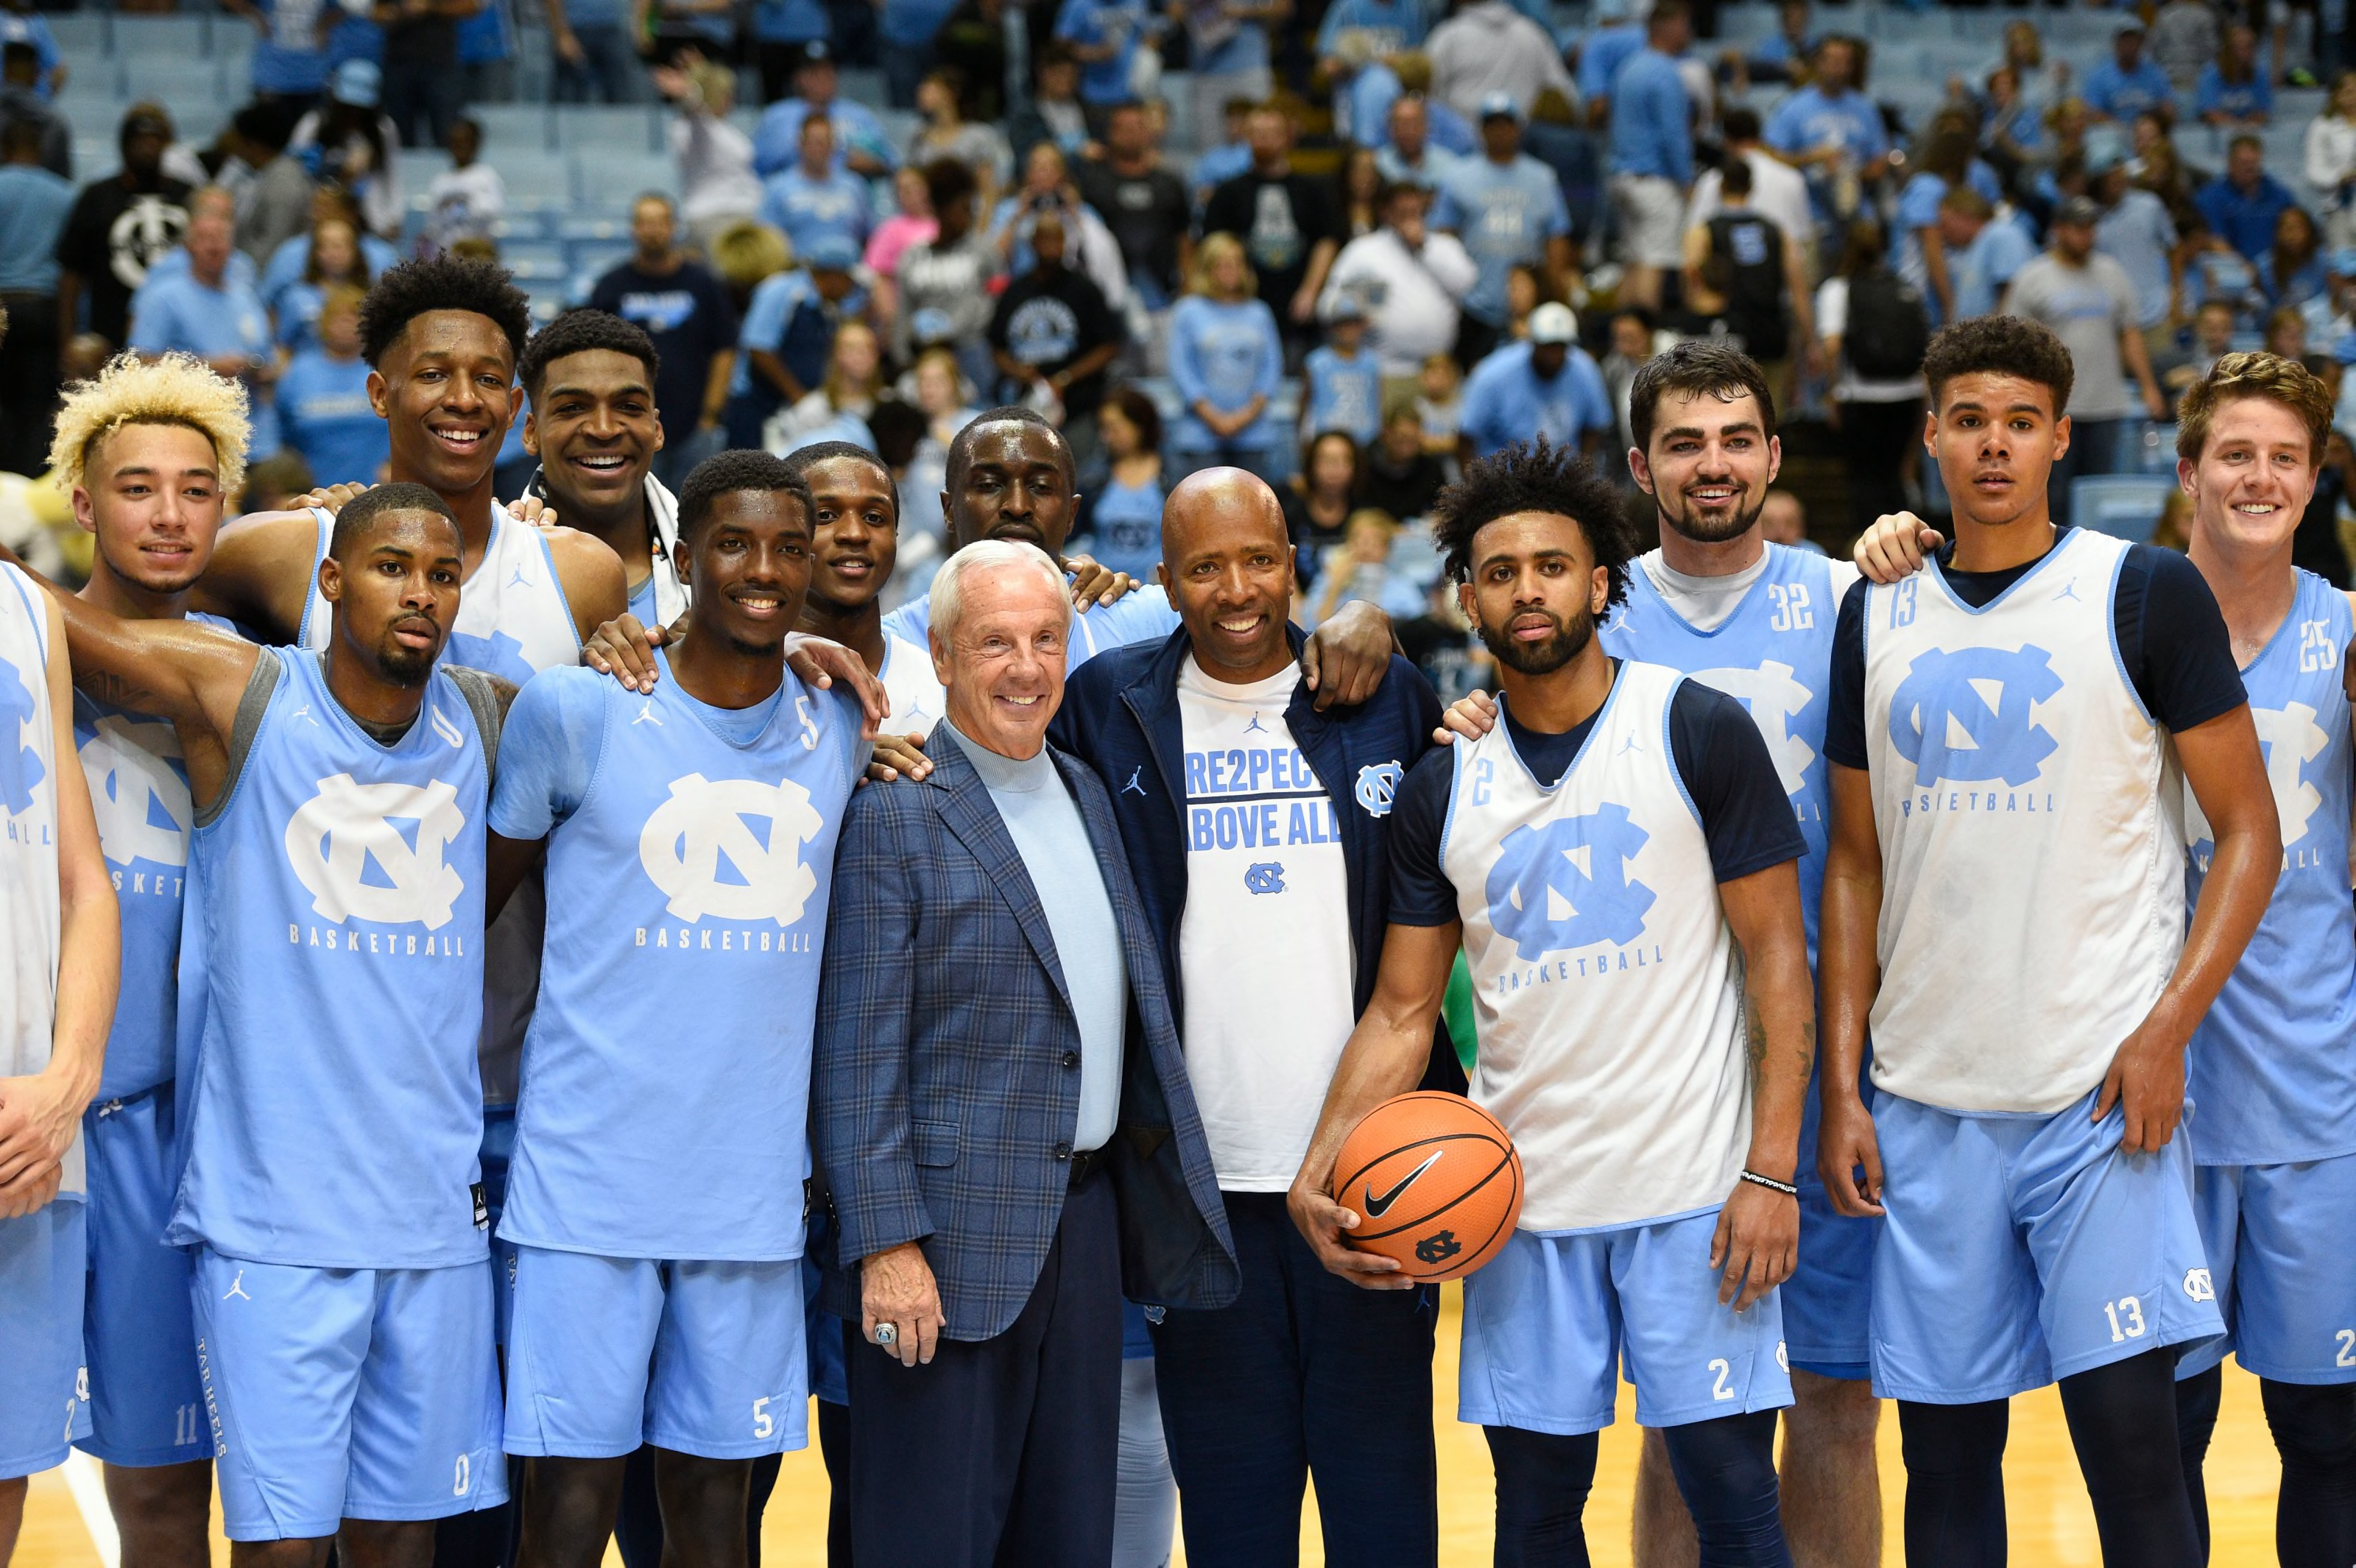 Kenny Smith UNC assists leader jersey